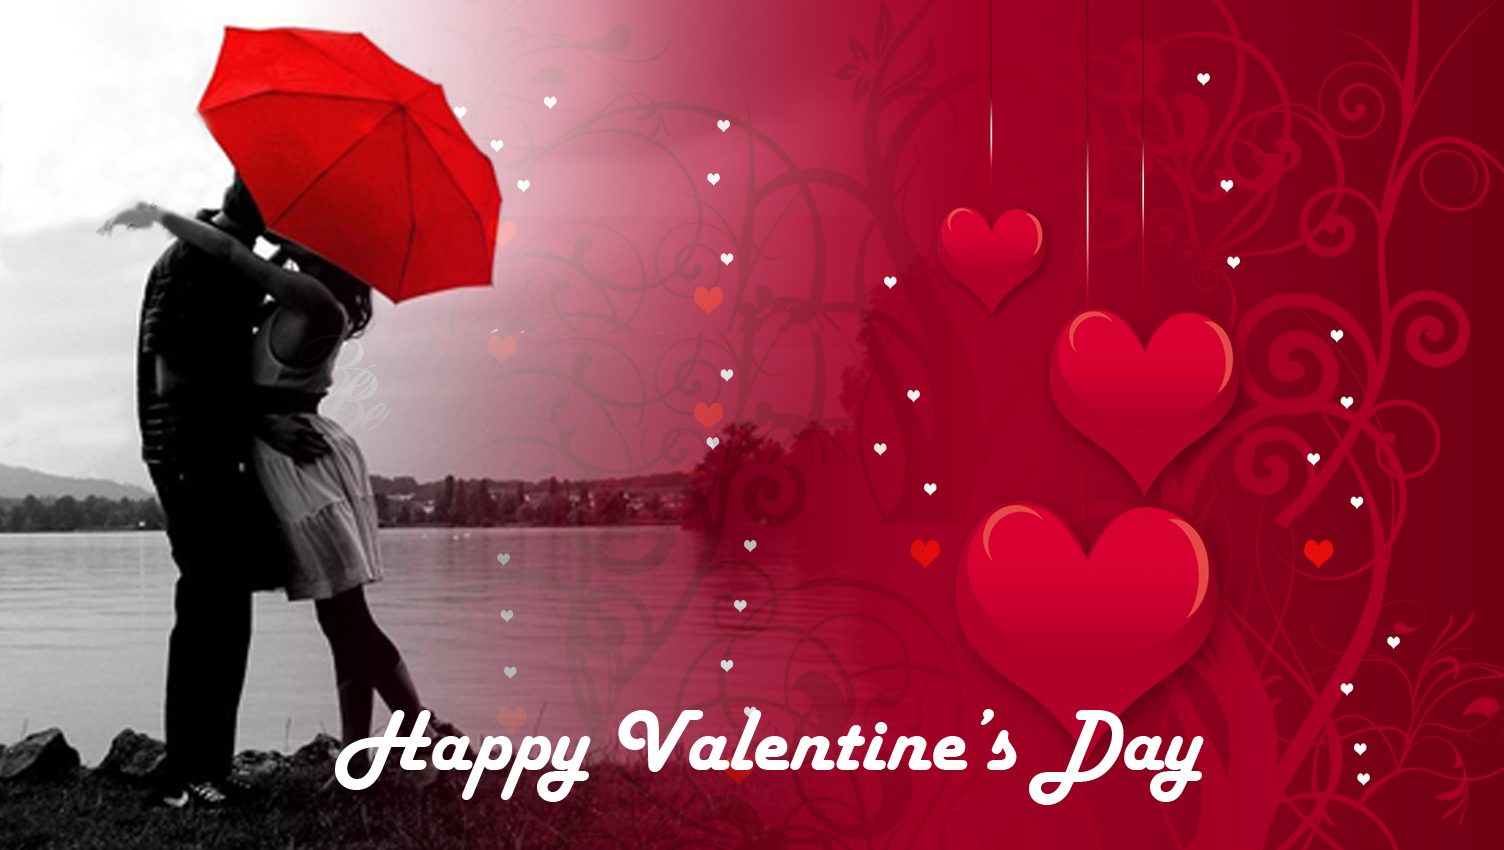 BEST HAPPY VALENTINES DAY IMAGES 2